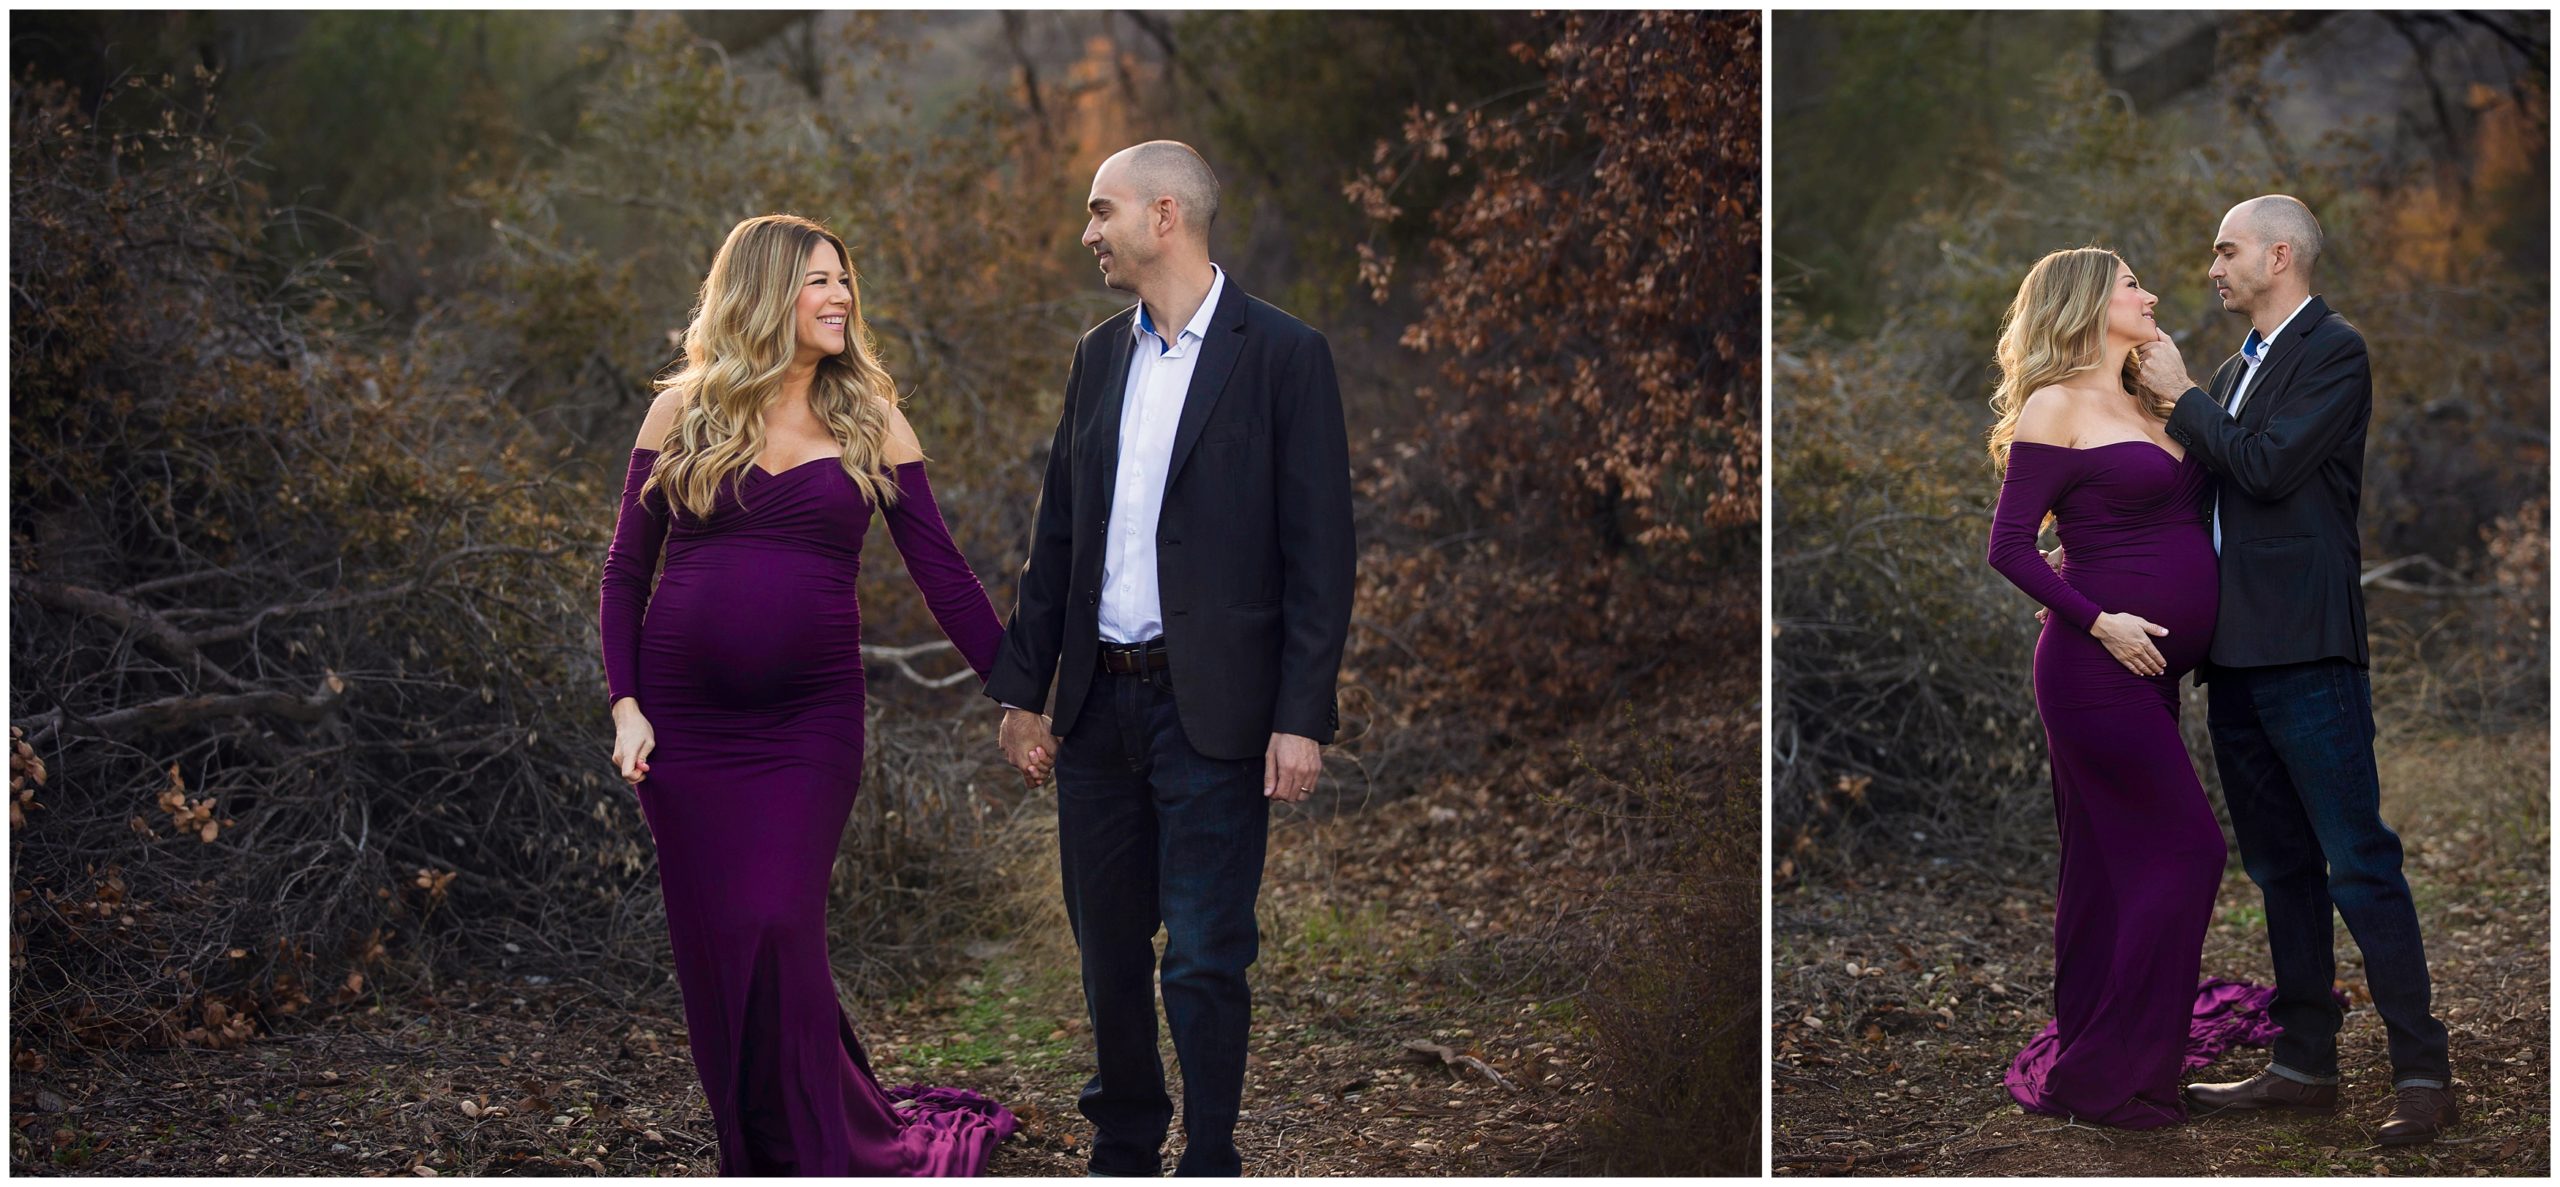 sew trendy maternity gown, plum maternity dress, Corona maternity photography, maternity photographer corona ca, maternity photographer Riverside ca, Southern California premiere maternity photographer, baby bump photography, family photography corona ca, spring maternity photography, outdoor maternity photography